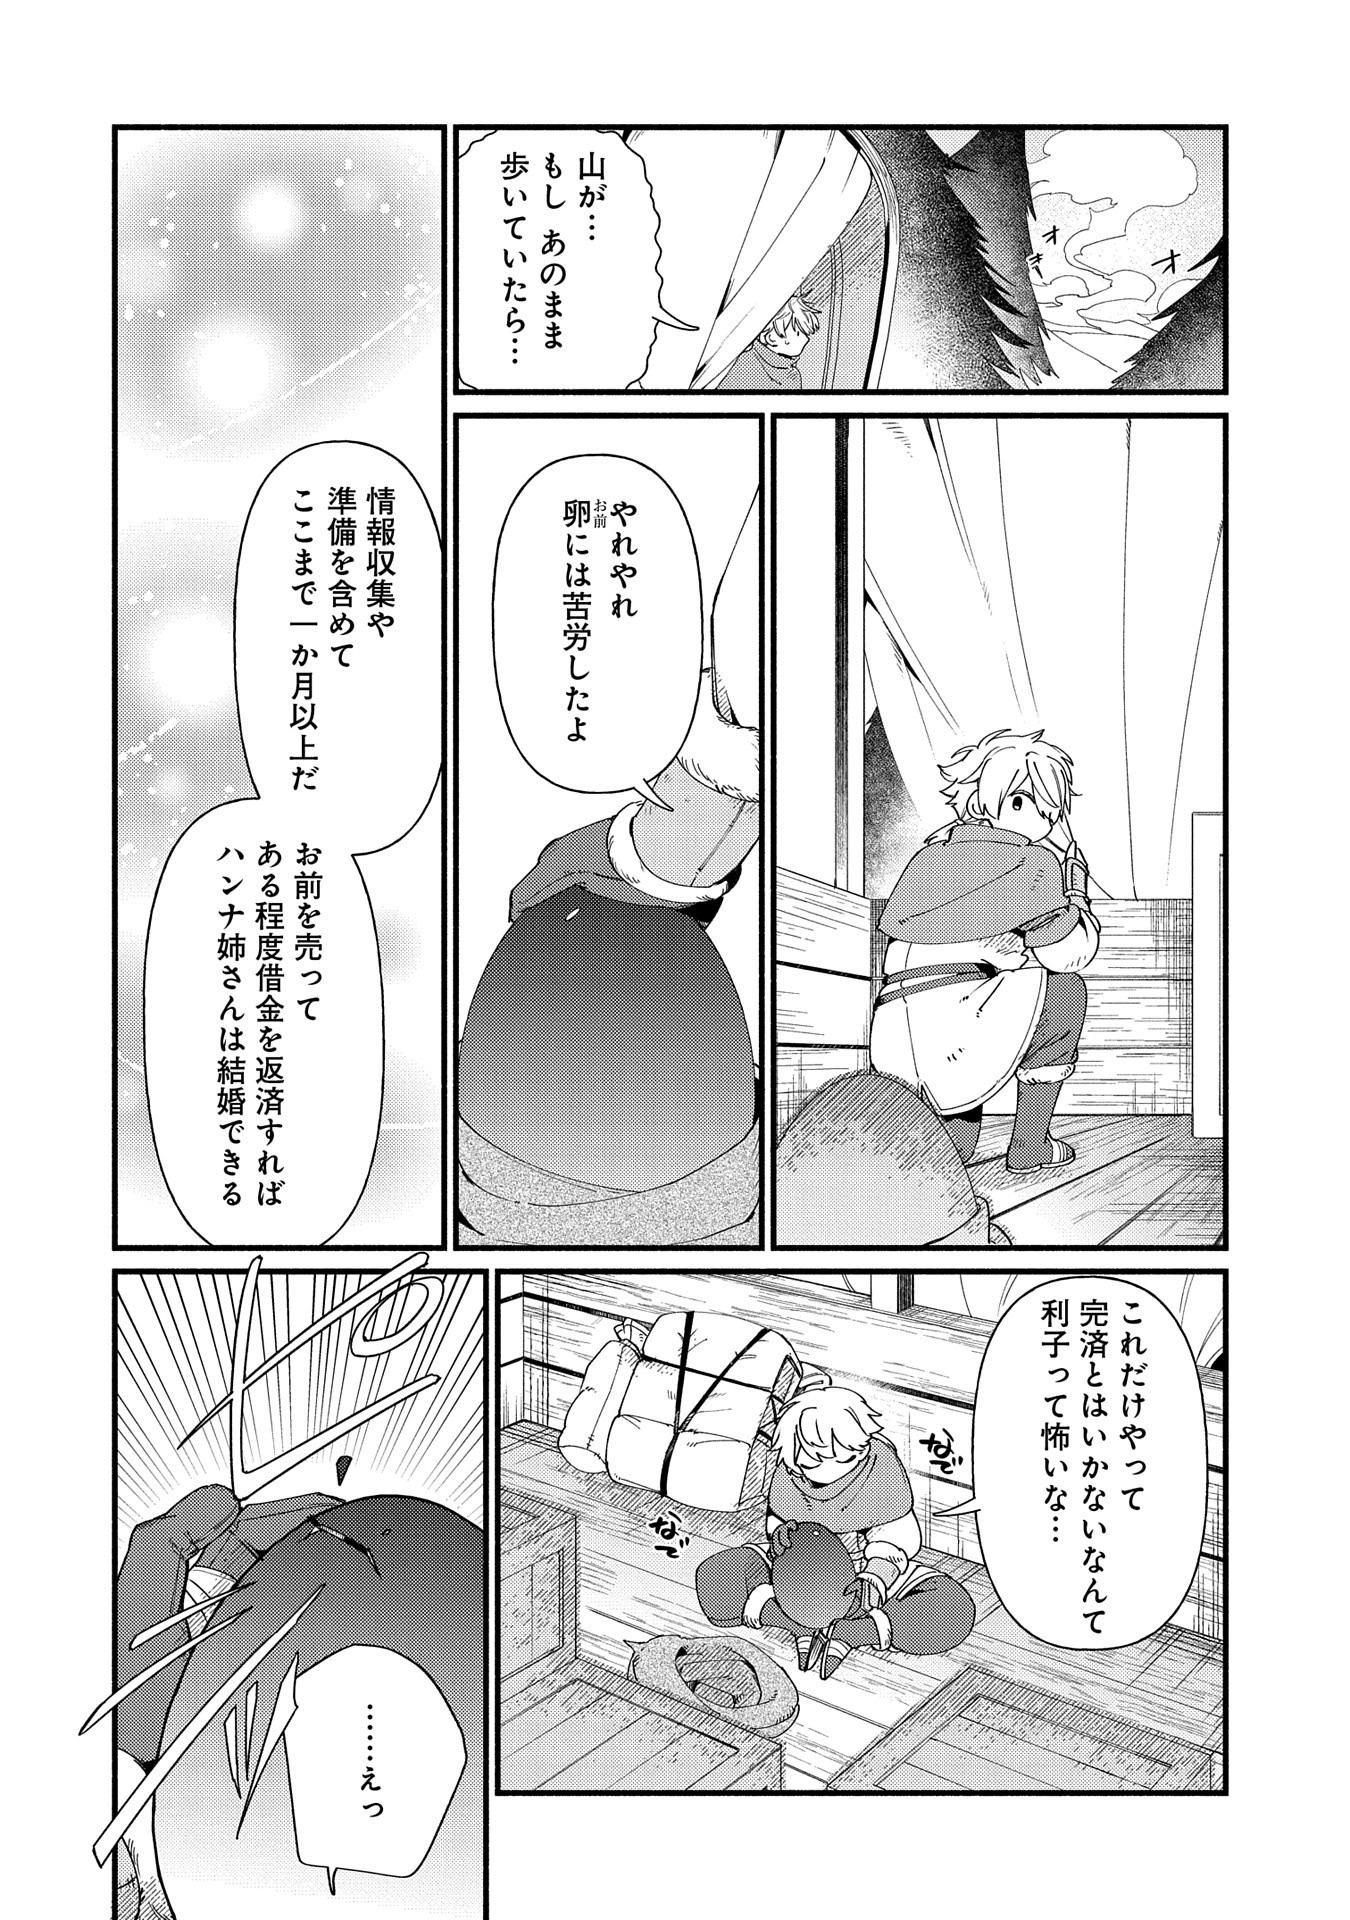 Nord’s Adventure 第11.1話 - Page 14